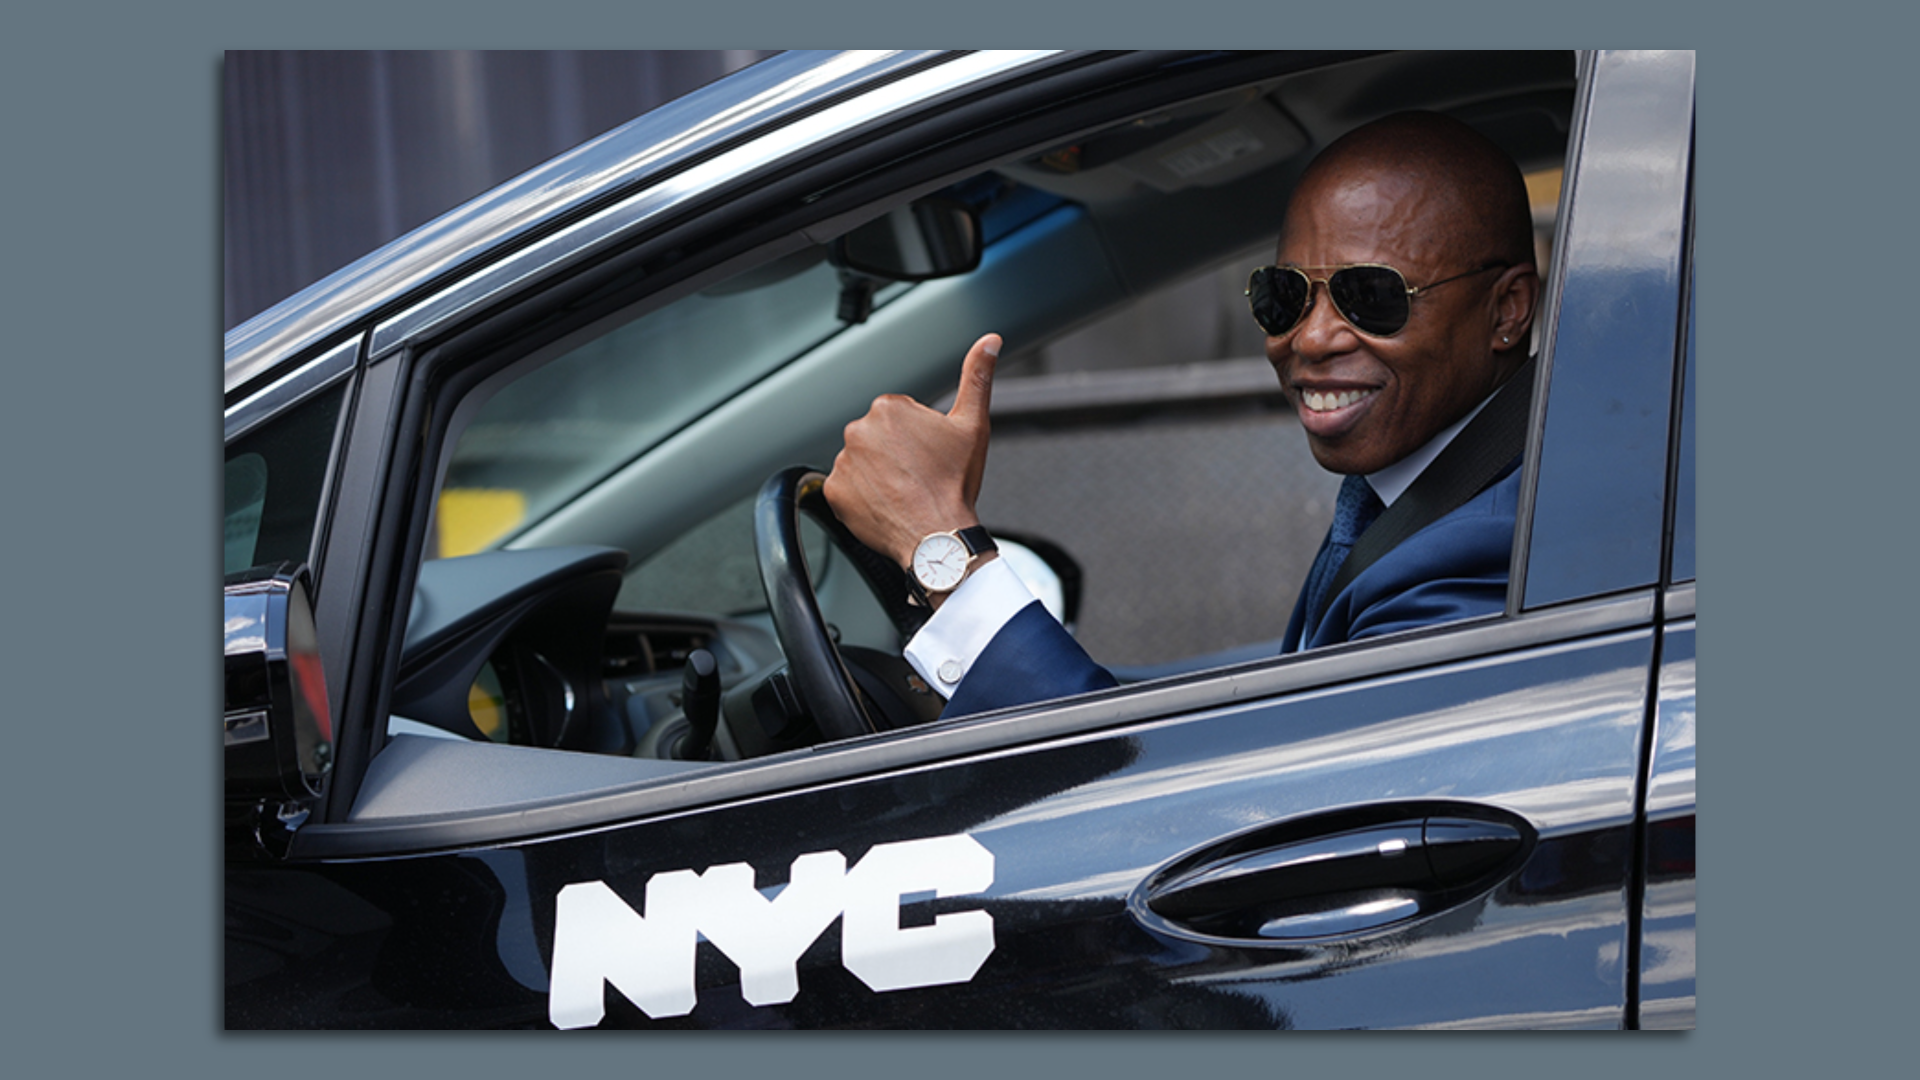 New York Mayor Eric Adams poses in a car equipped with speed-limiting technology.